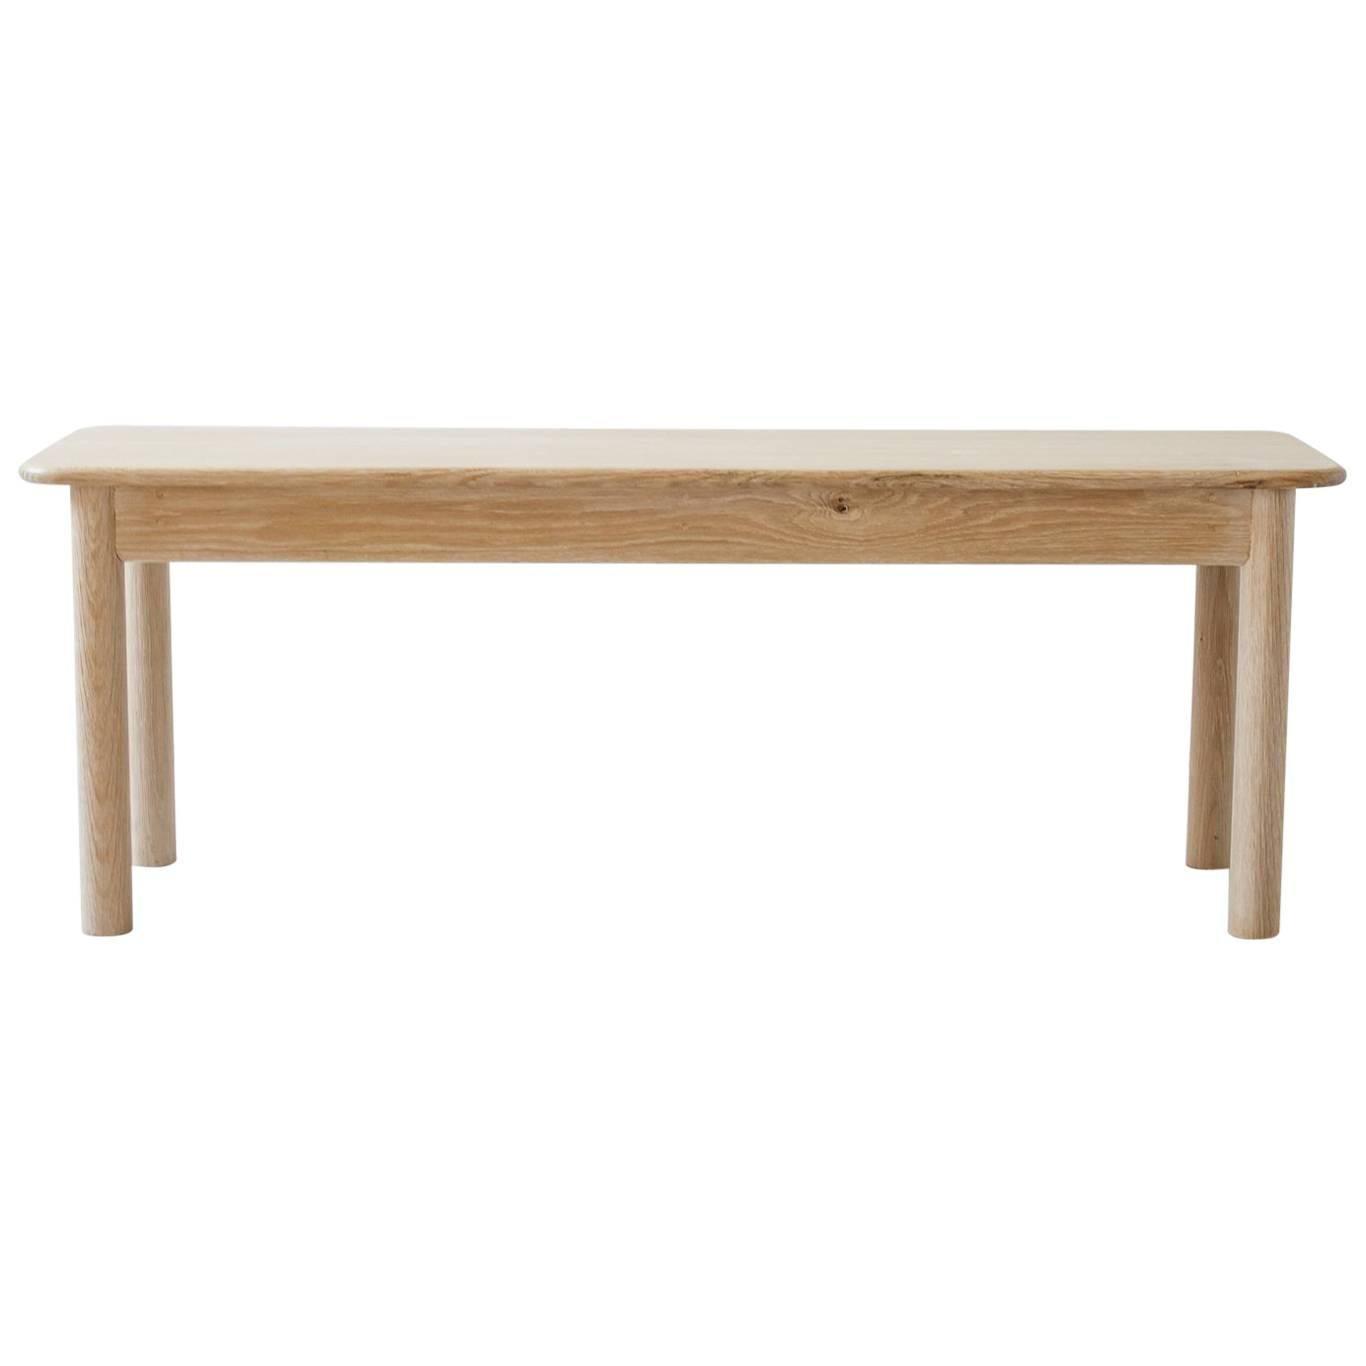 Contemporary Wood Range Bench in White Oak by Fort Standard For Sale